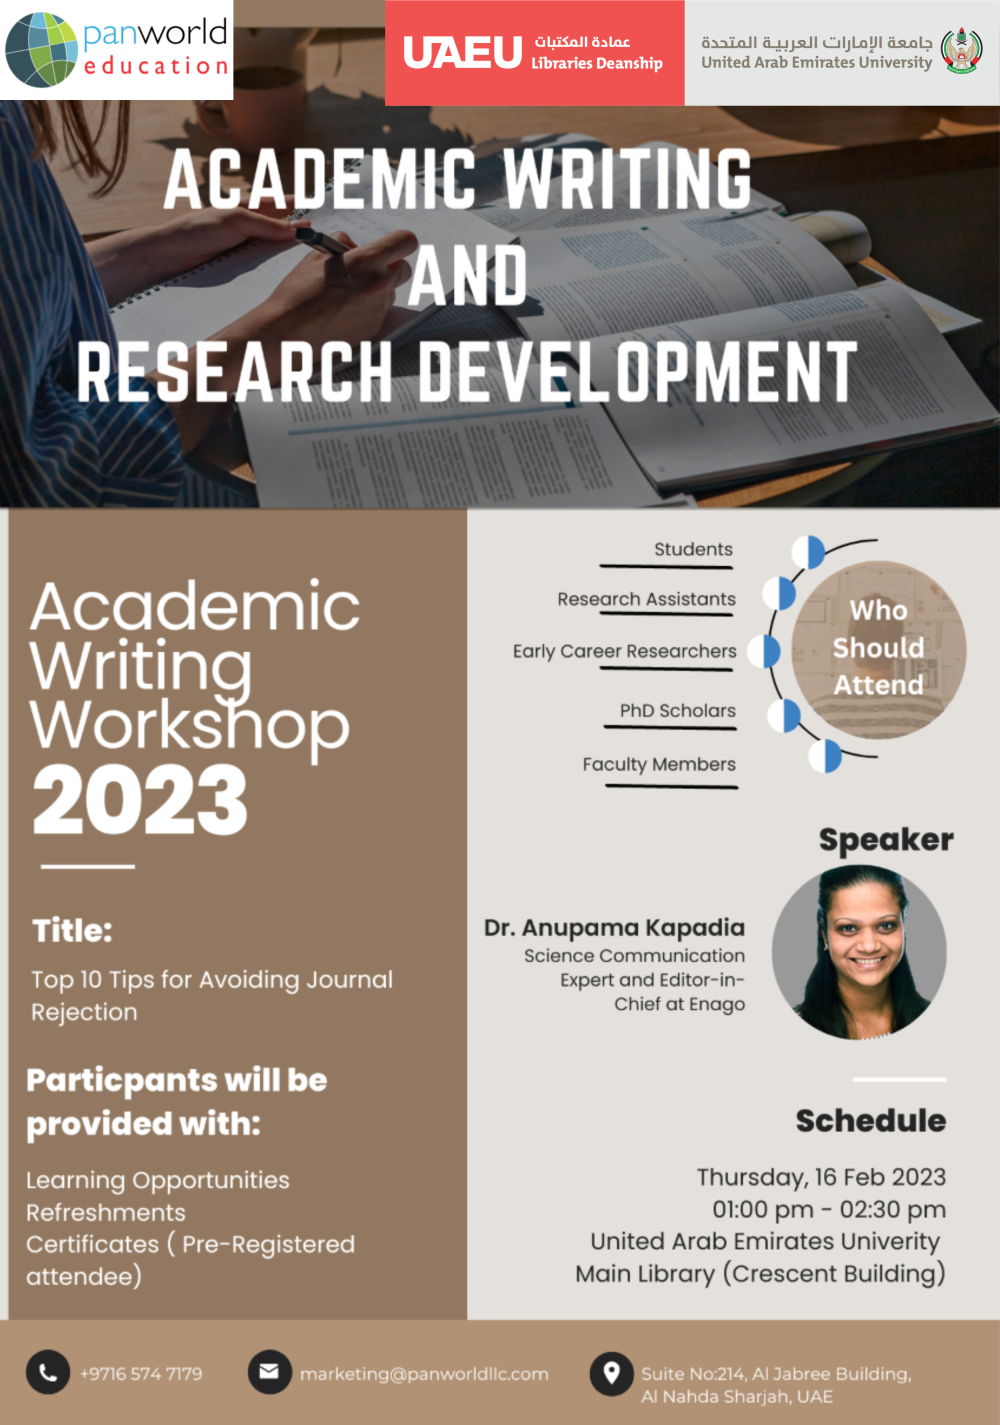 Academic Writing Workshop 2023: Top 10 Tips for Avoiding Journal Rejection